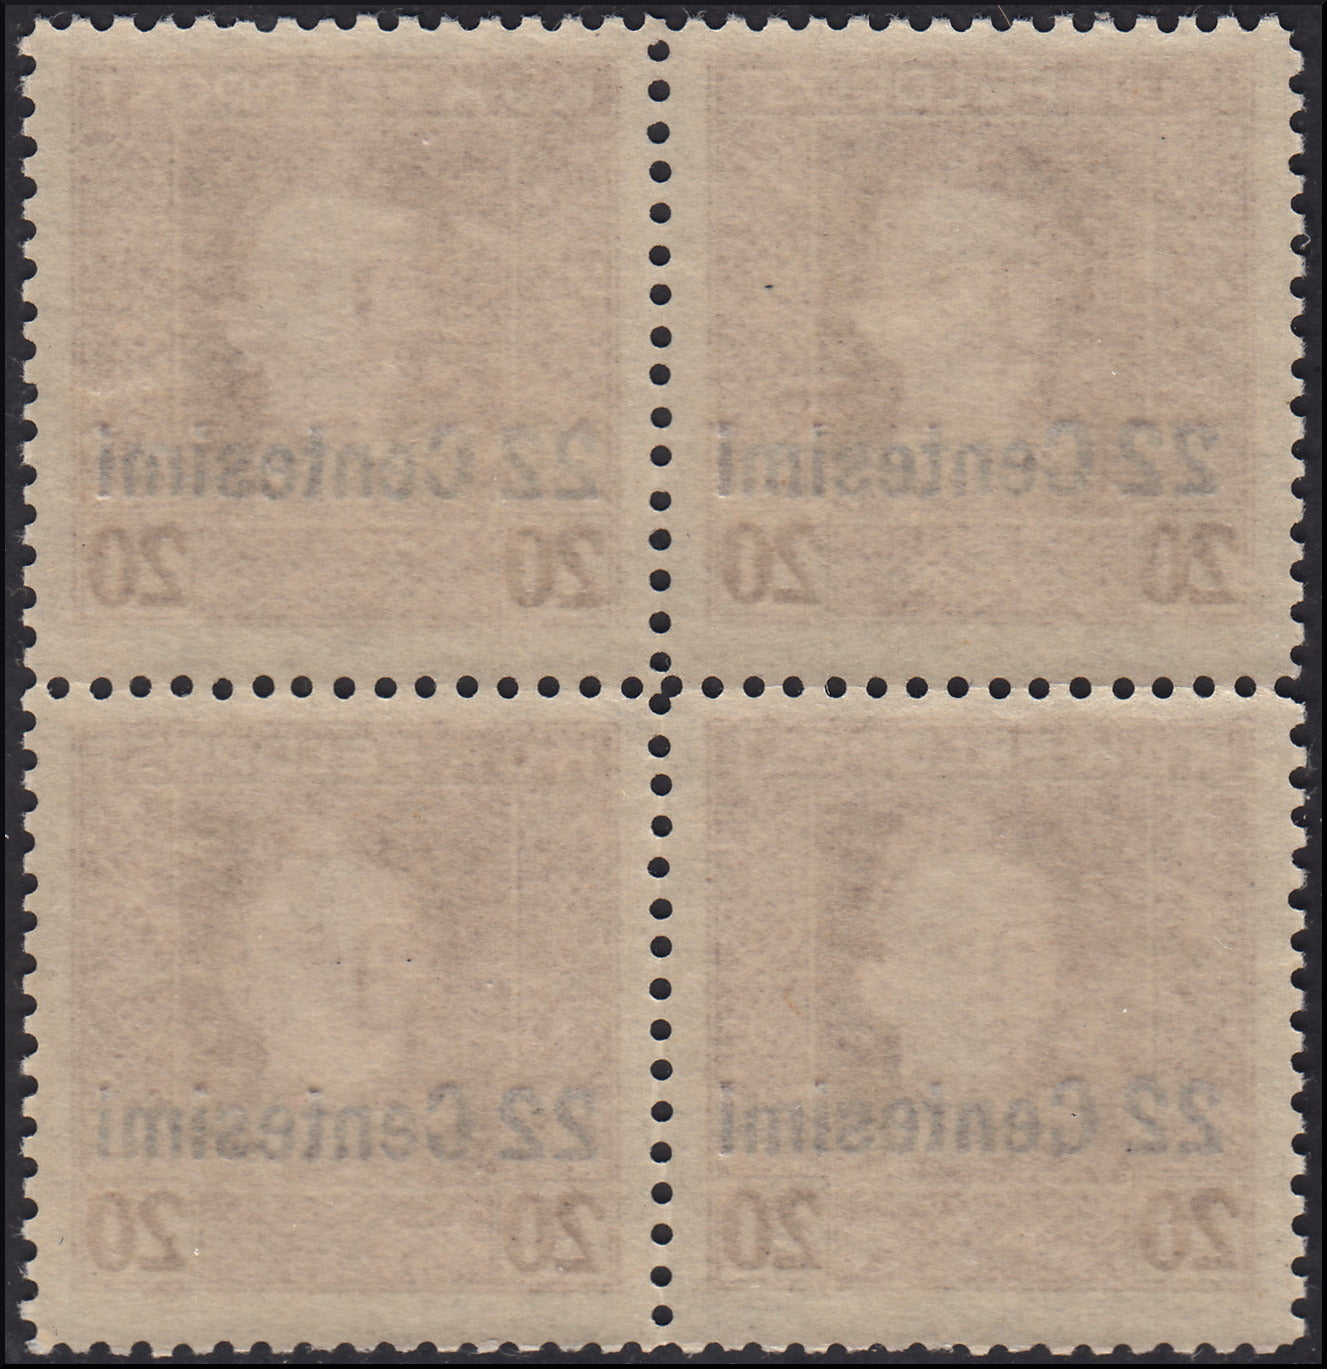 A04 - 1918 - Austrian occupation of Friuli and Veneto, overprinted Austrian stamps, c.22 out of 20 brown perforation 11 1/2 instead of 12 1/2, new block of four copies with intact gum (9aa) 